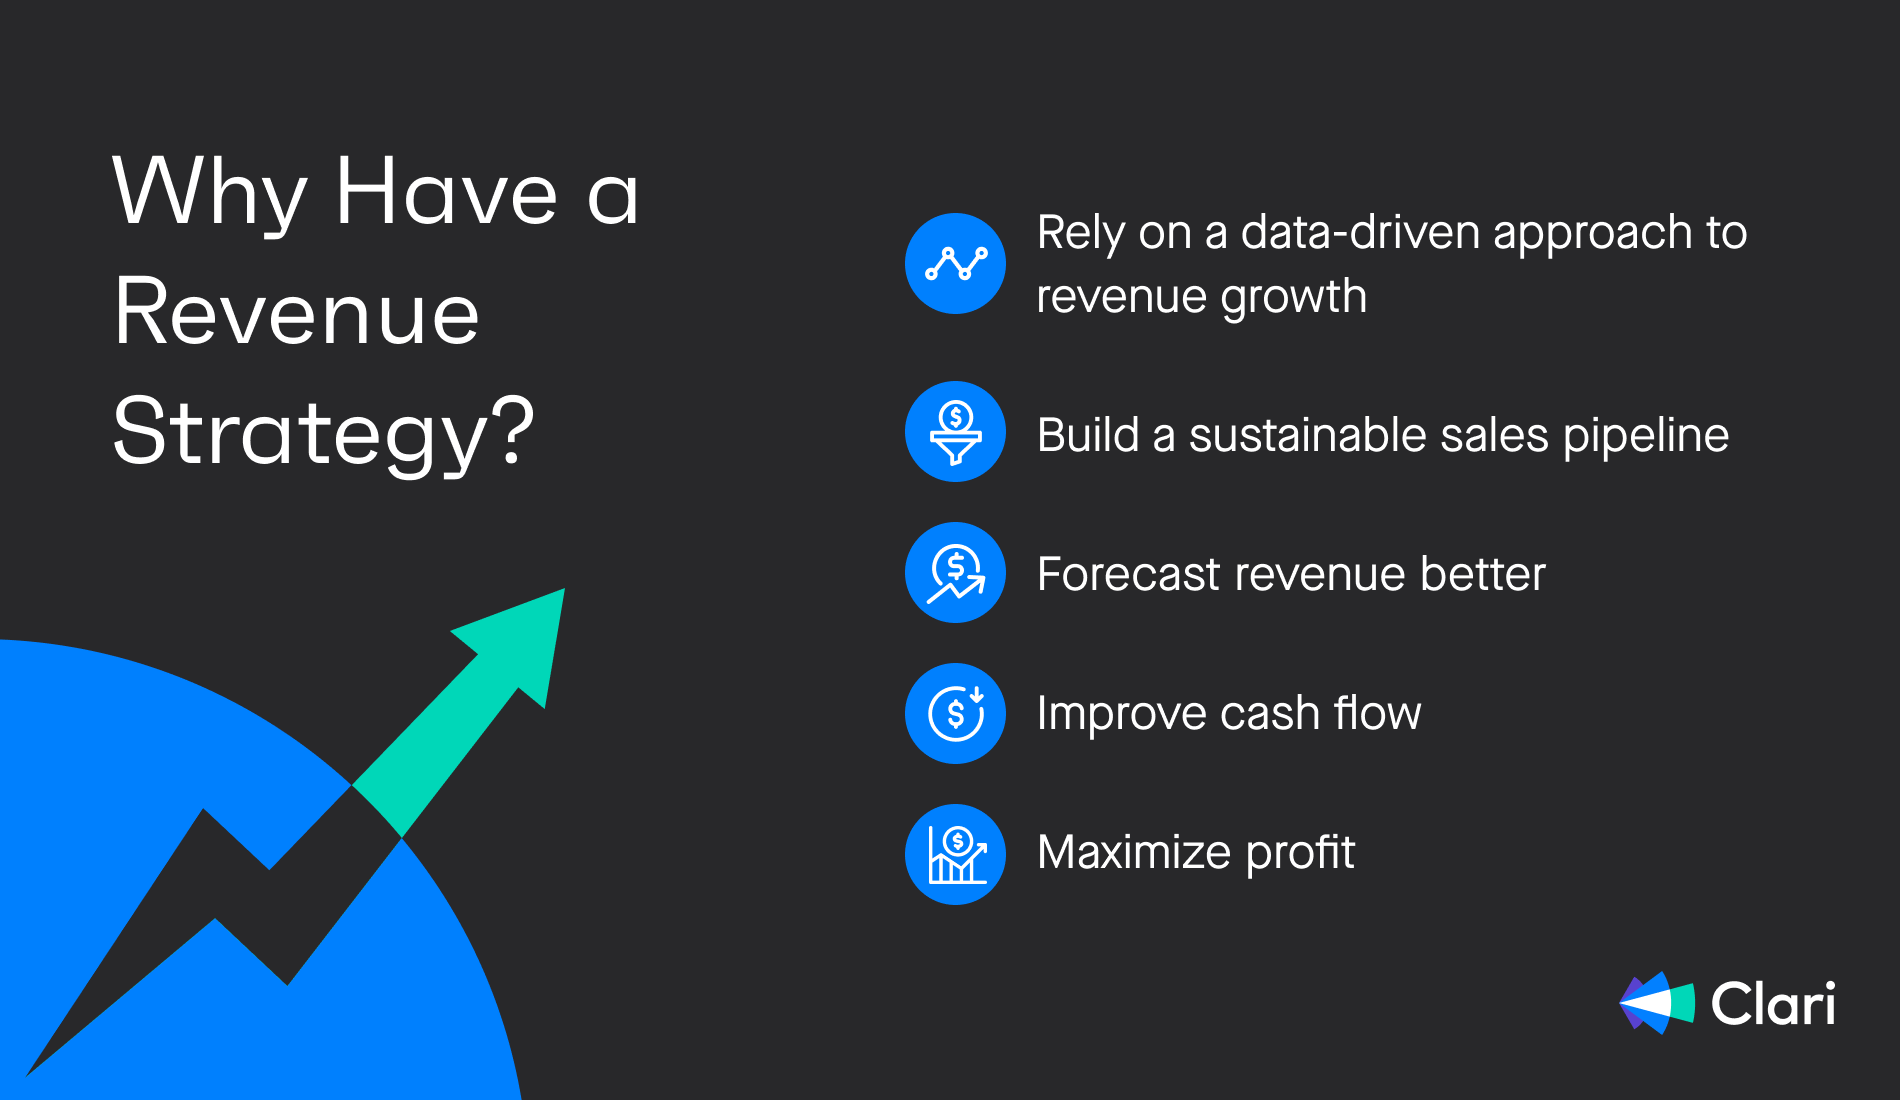 Why have a revenue strategy?